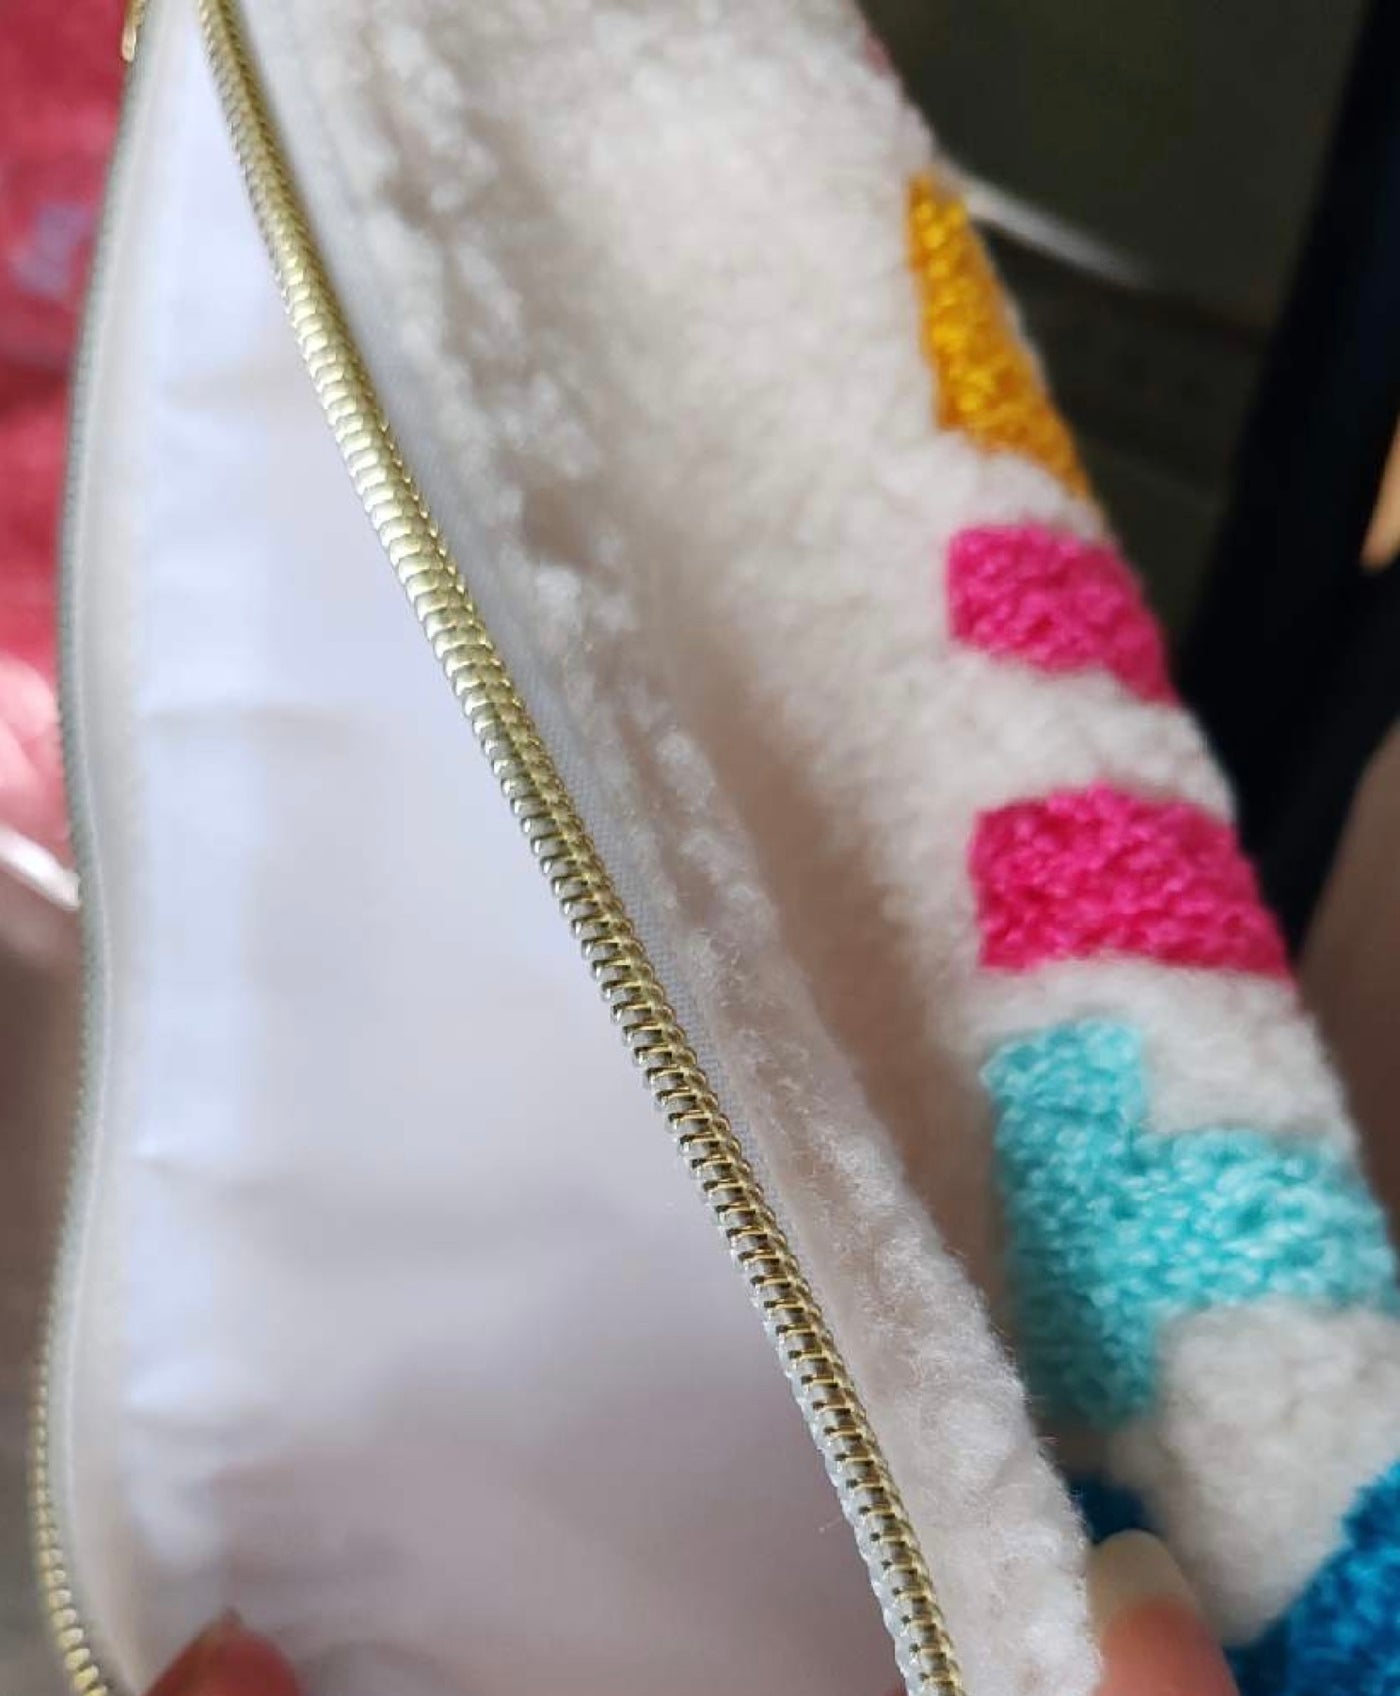 Fluffy Cosmetic Bags